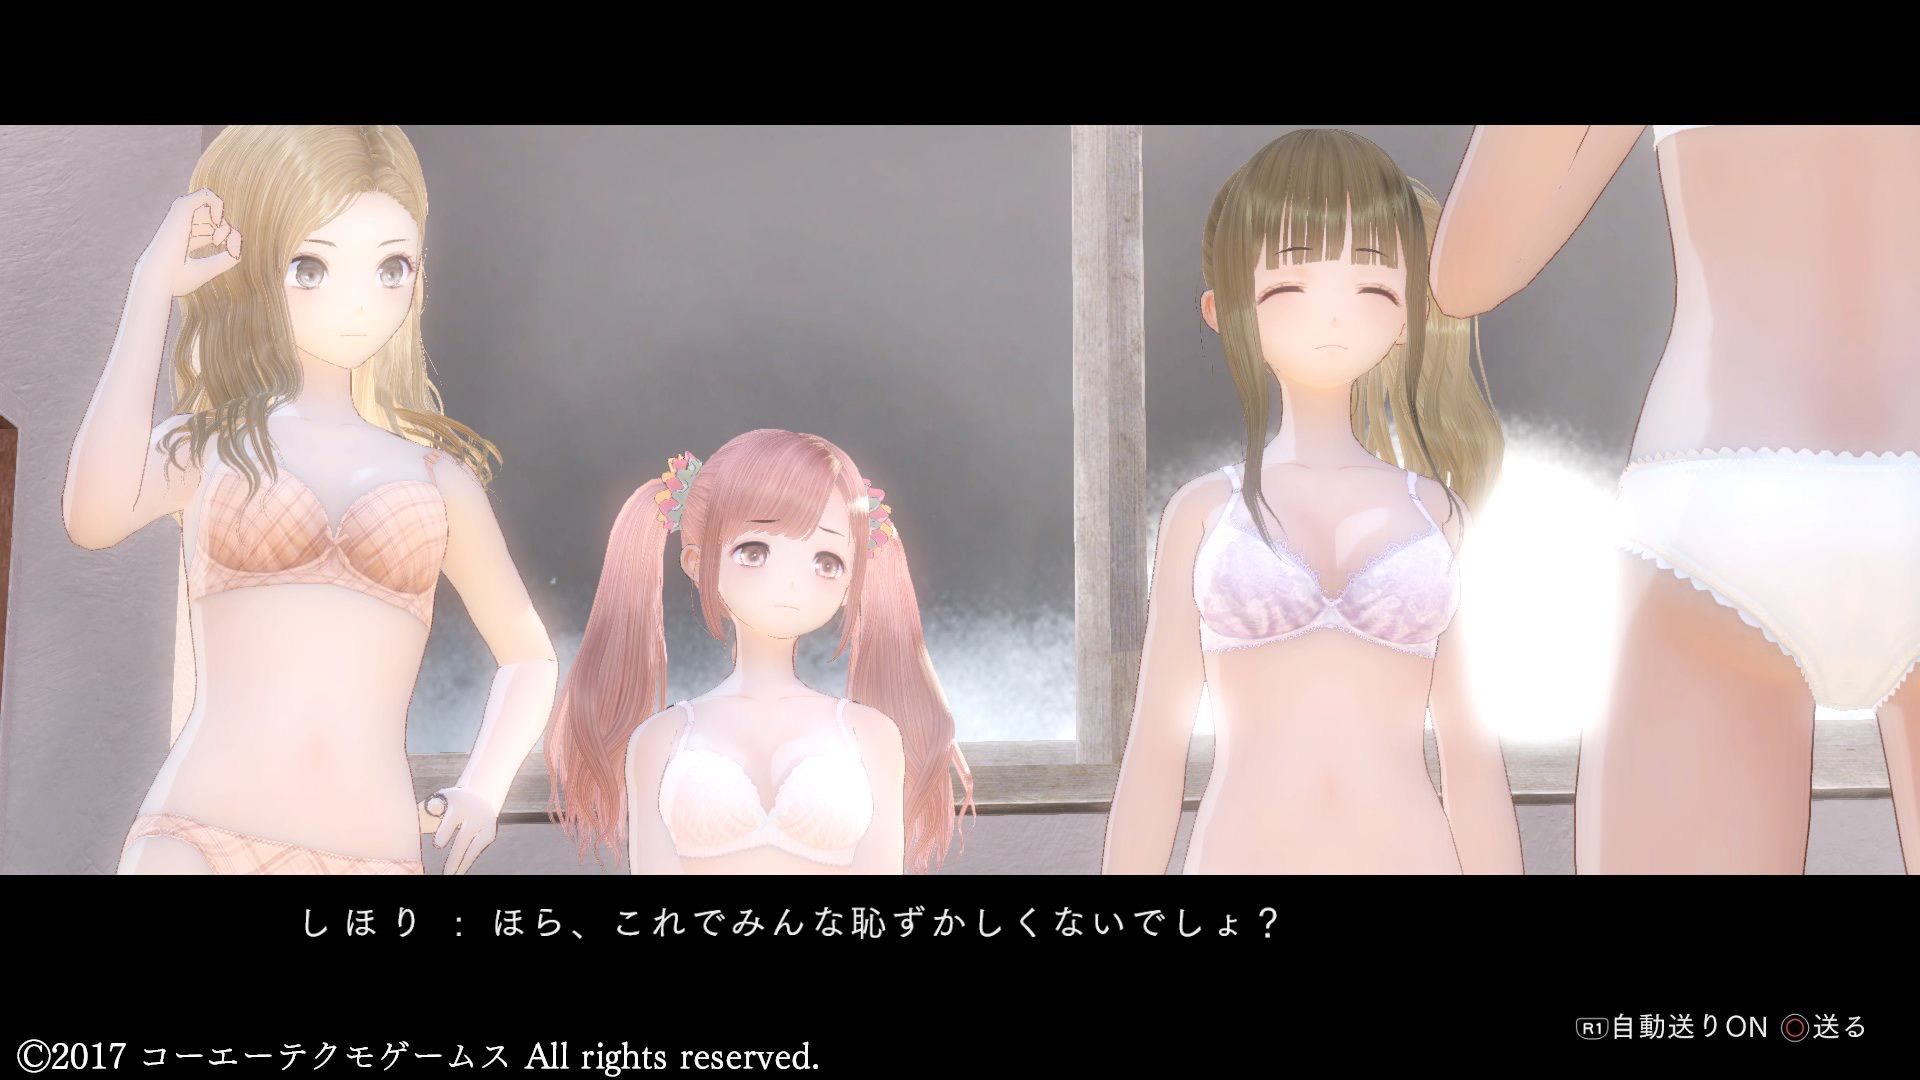 [image] Game H with a view of the underwear passes; ワロタ wwwwwwwww 4